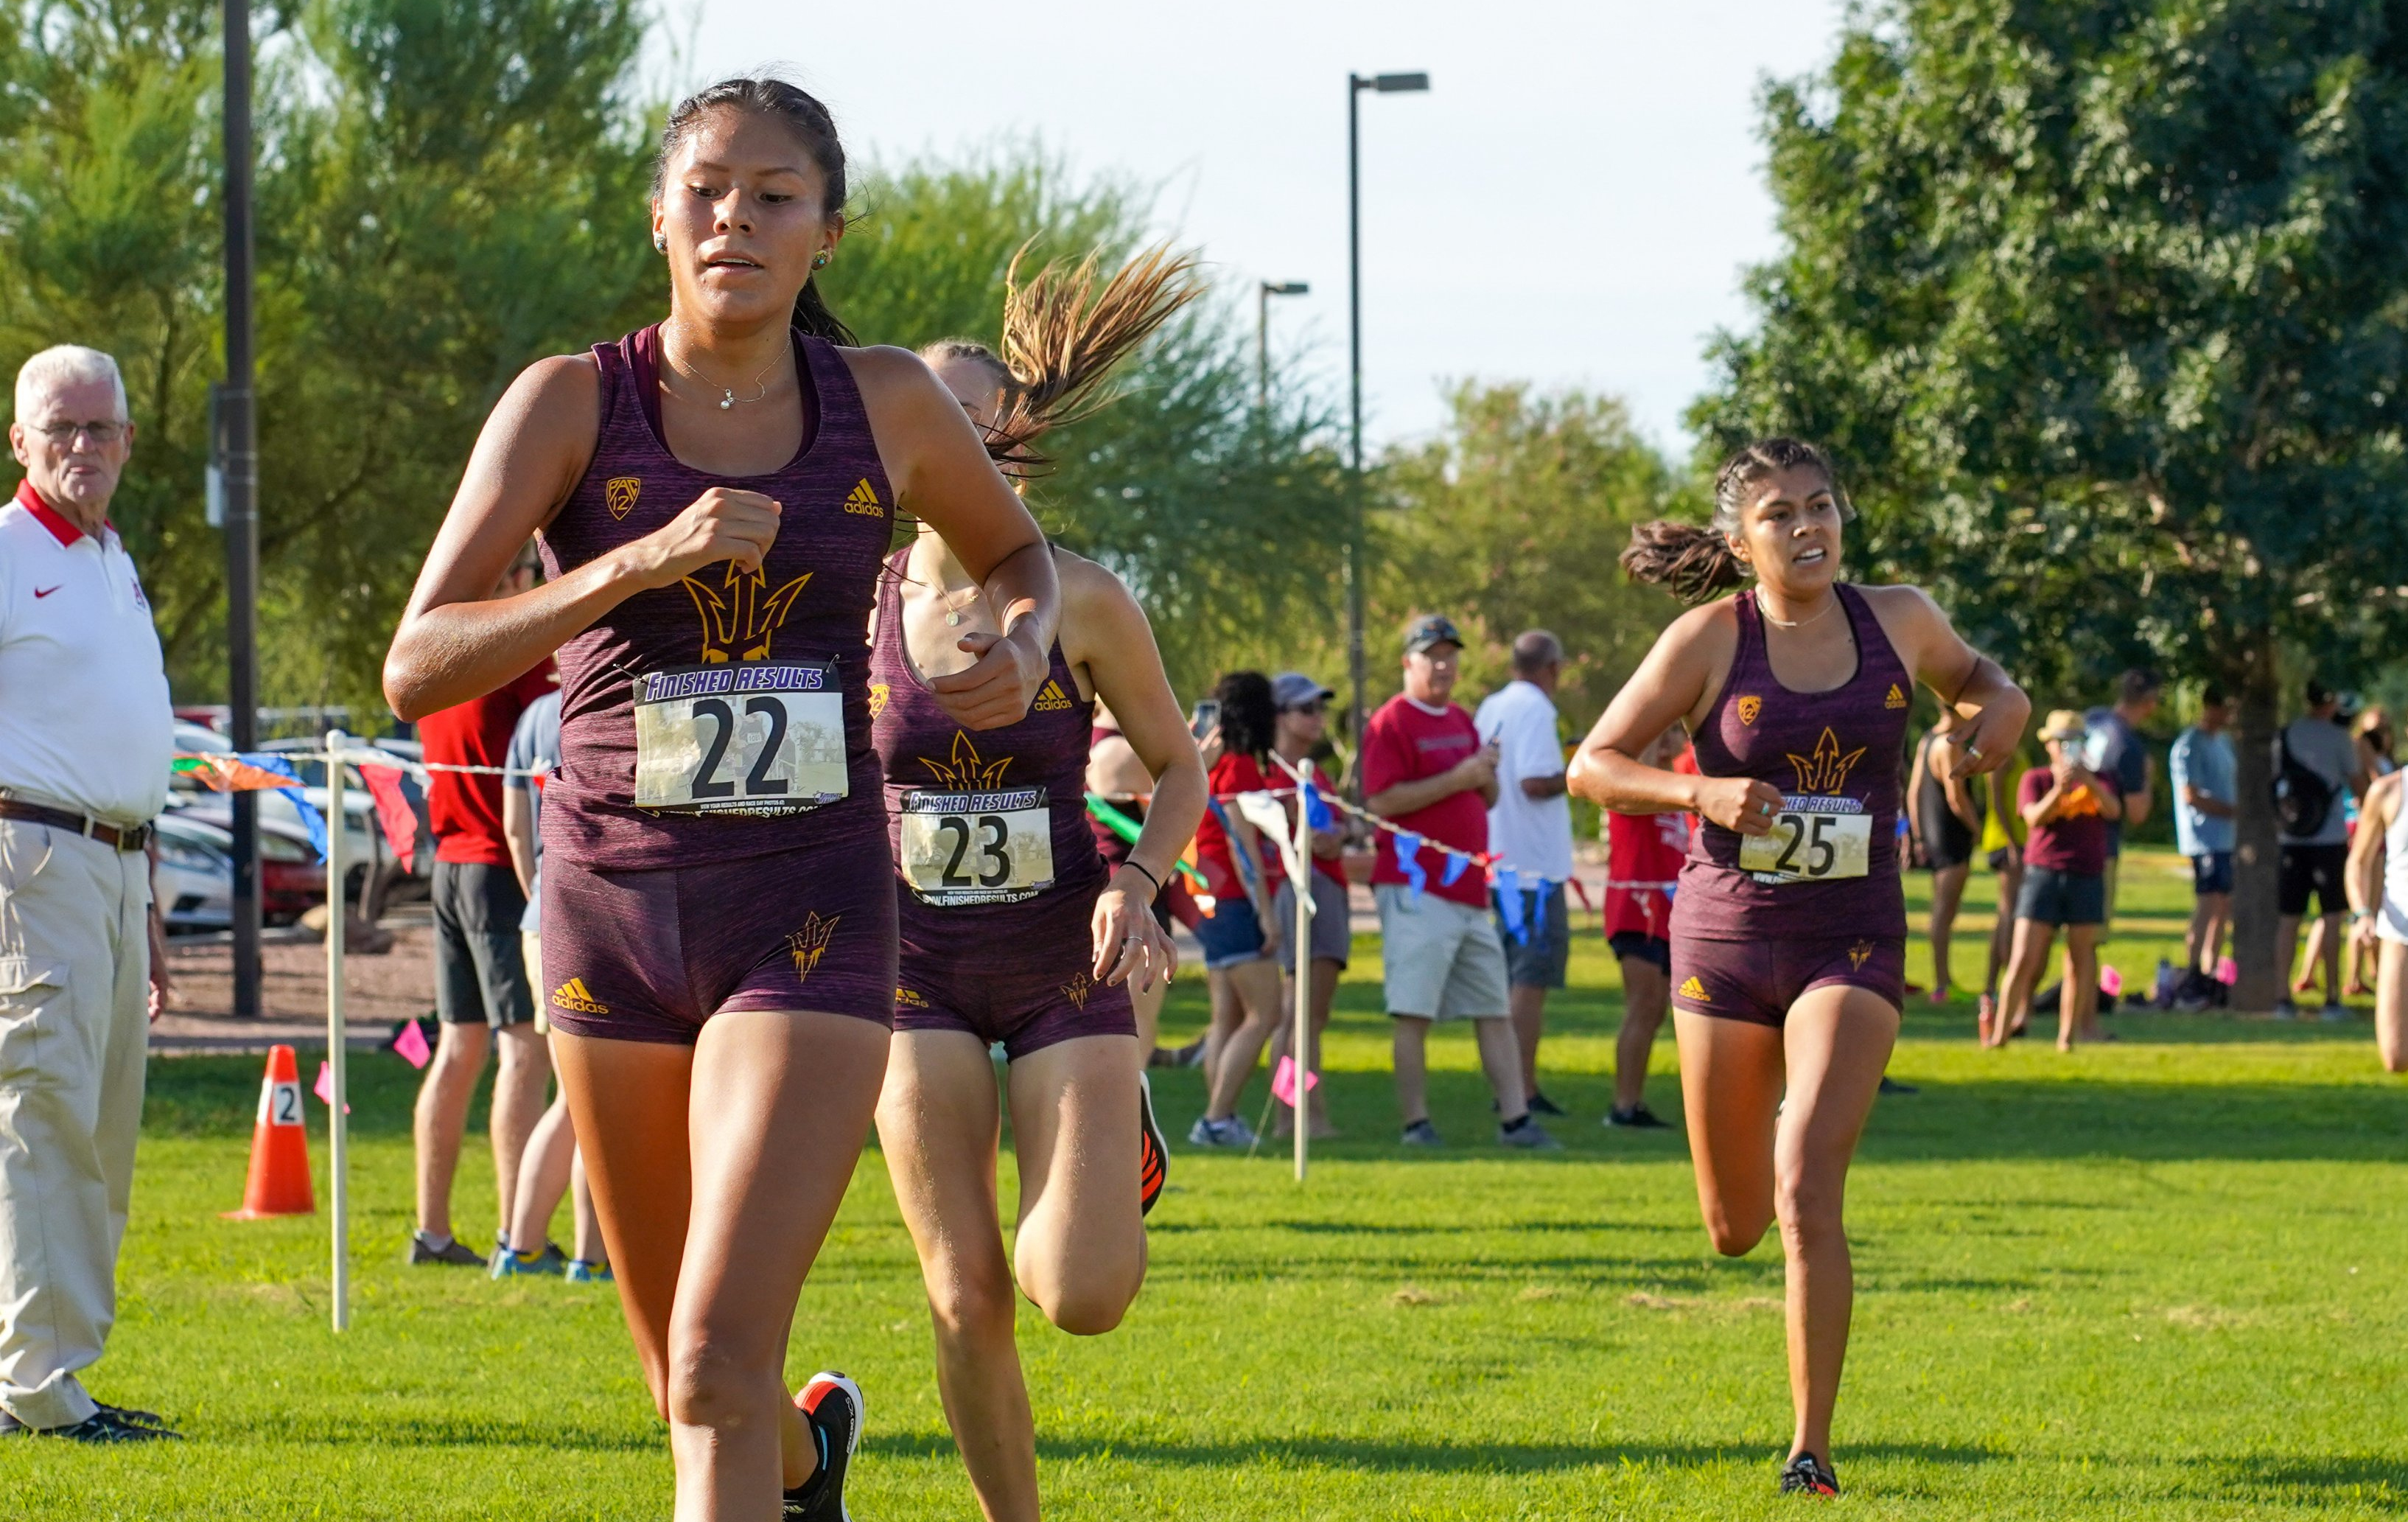 Arizona State’s Daan Haven (Navajo) Places 3rd Overall at USD Invite to lead Sun Devils Women’s XC to team title